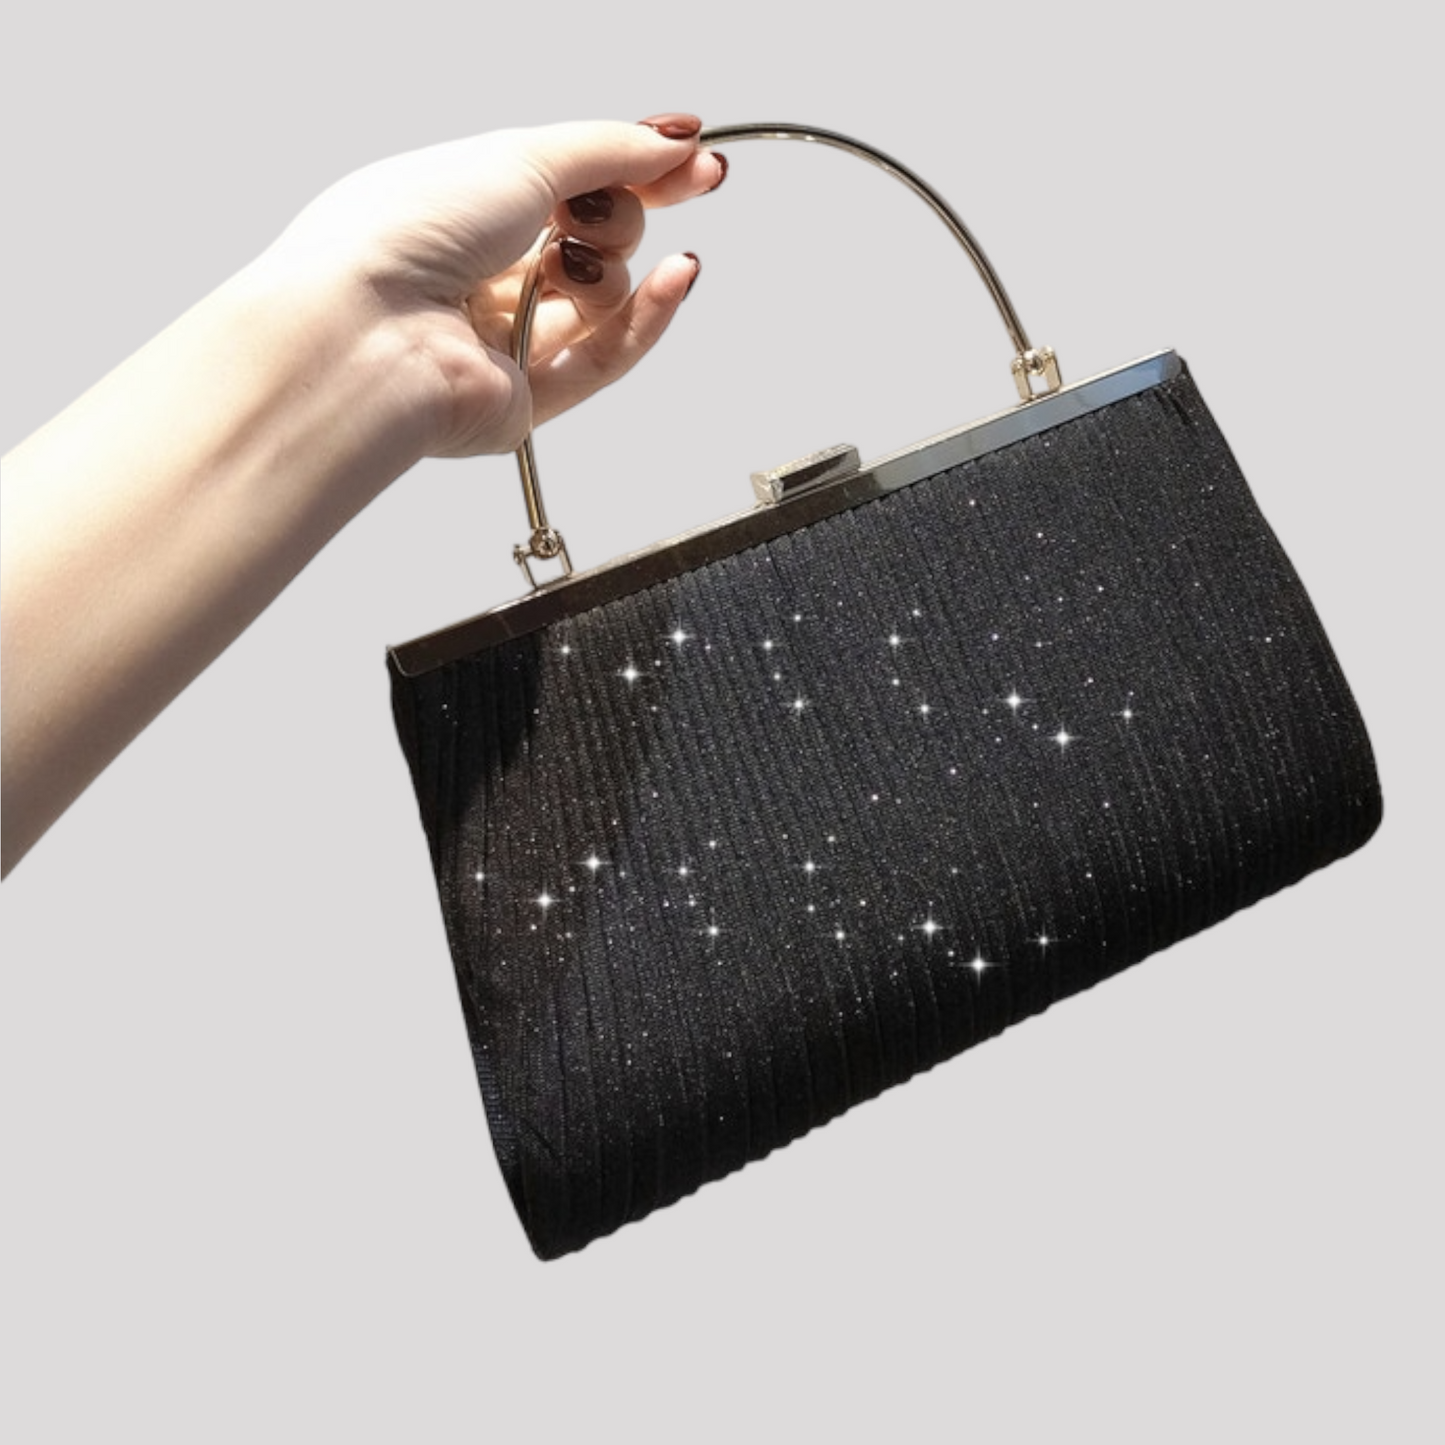 Glitter Clutch Handbag available in 2 colours